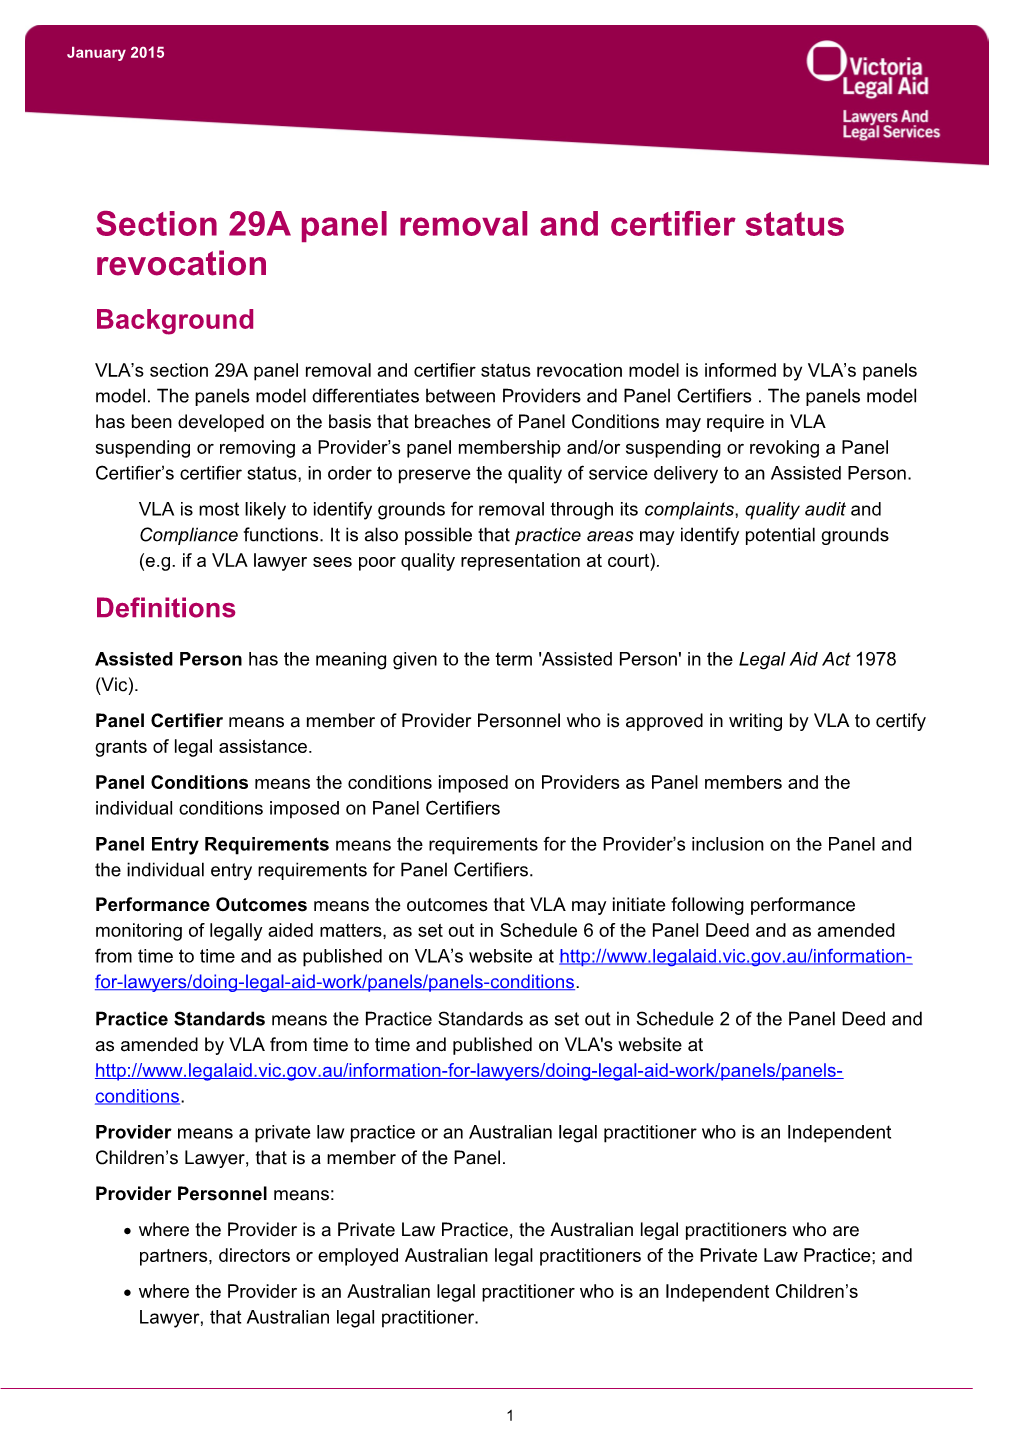 Section 29A Panel Removal and Certifier Status Revocation